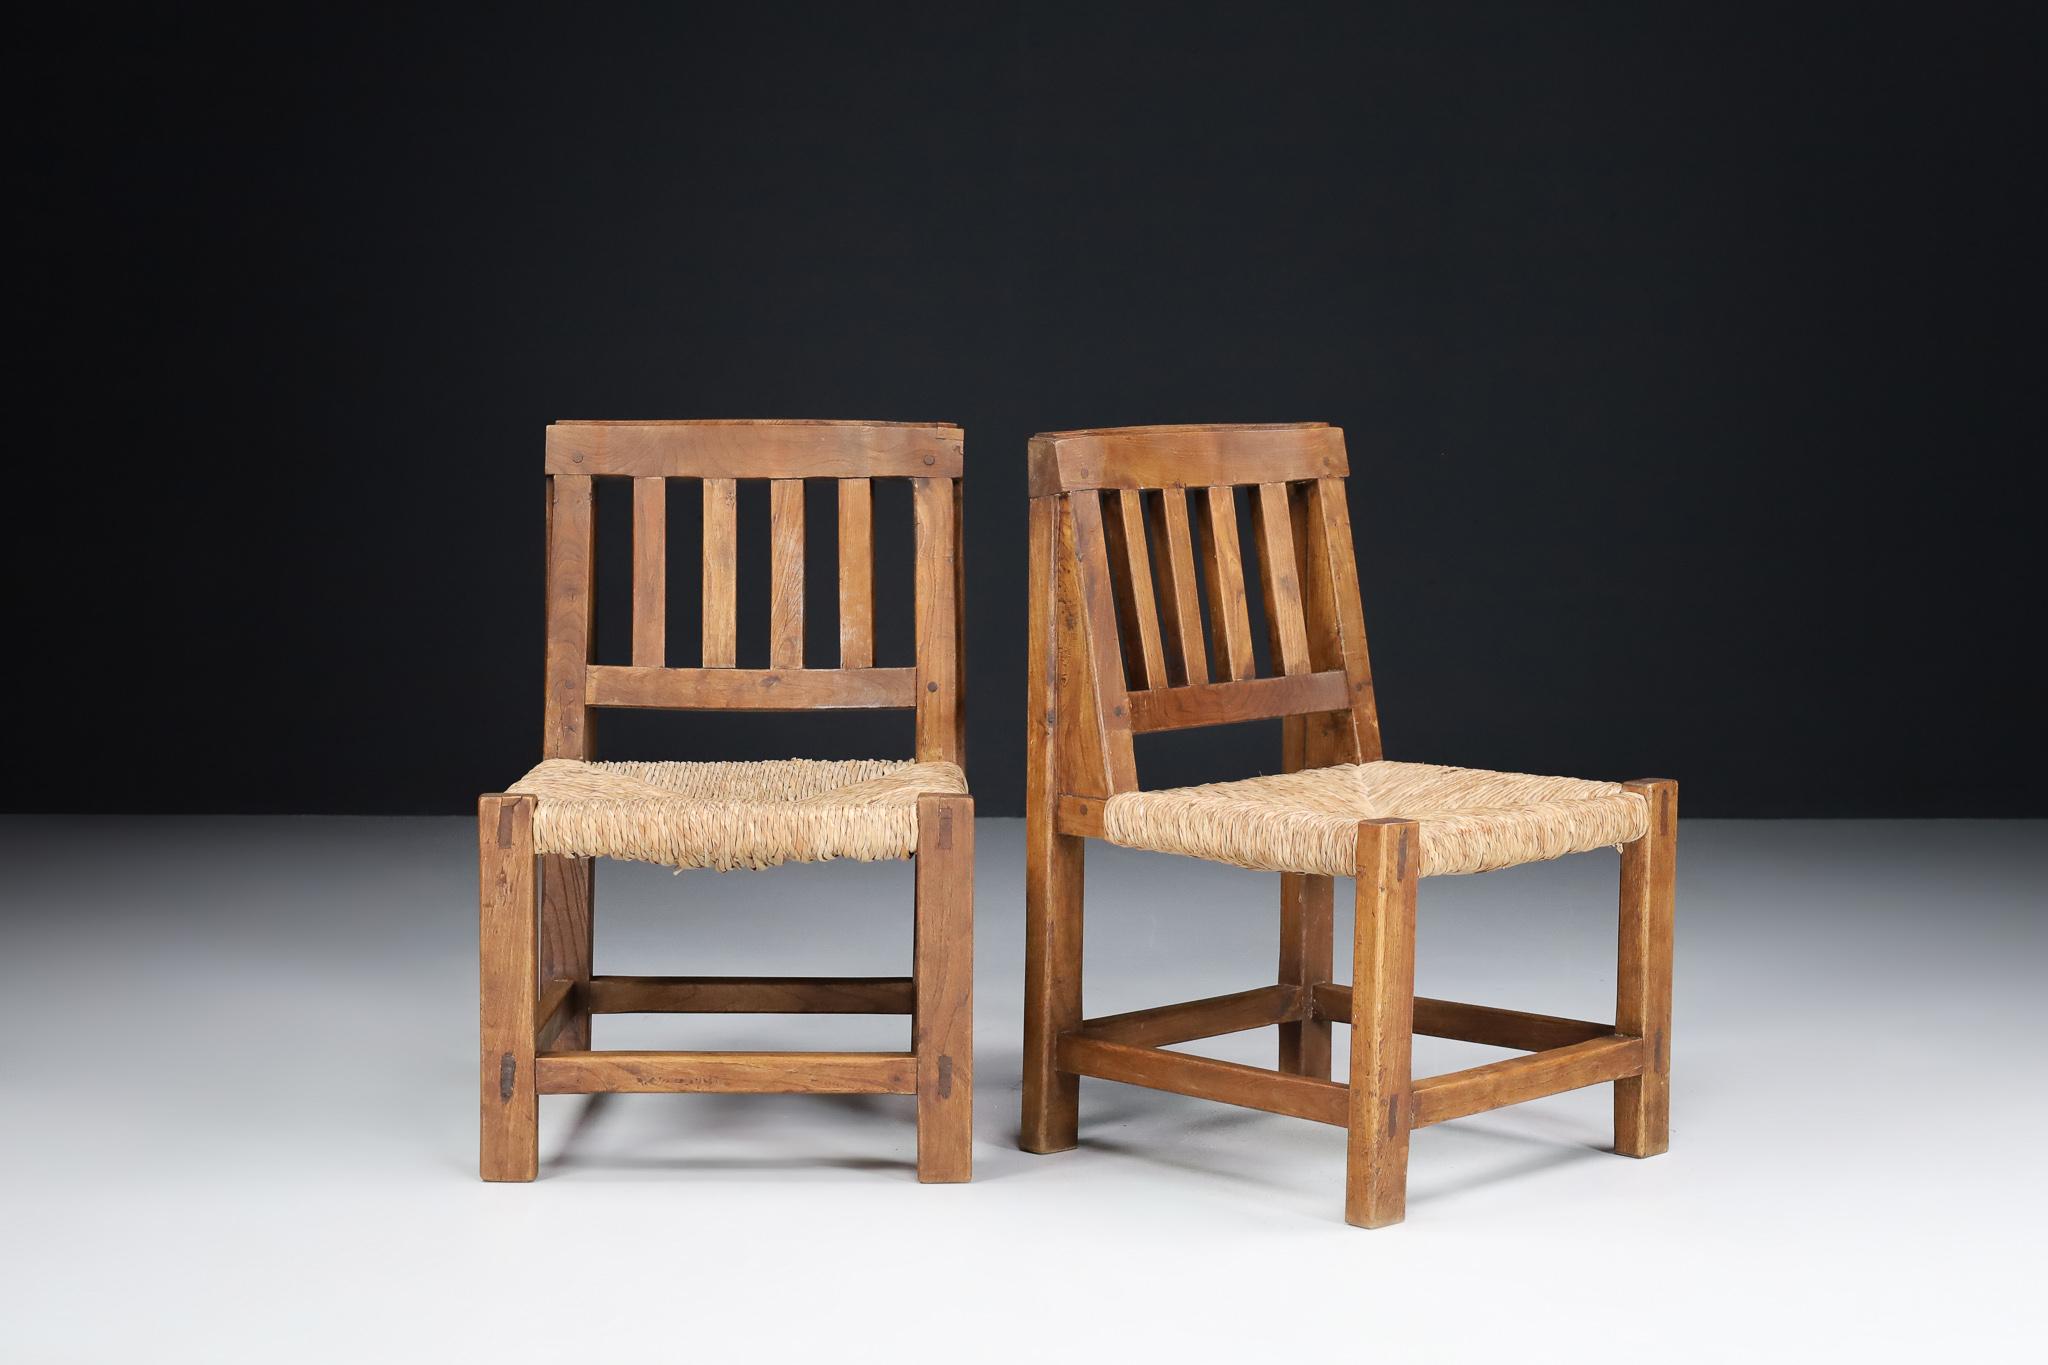 The chairs have a simple and timeless design. The fancy backrest and seat in straw combined with the pinewood structure form a truly balanced composition. The wooden elements on the lower part in front and on the side get imperceptibly thinner at